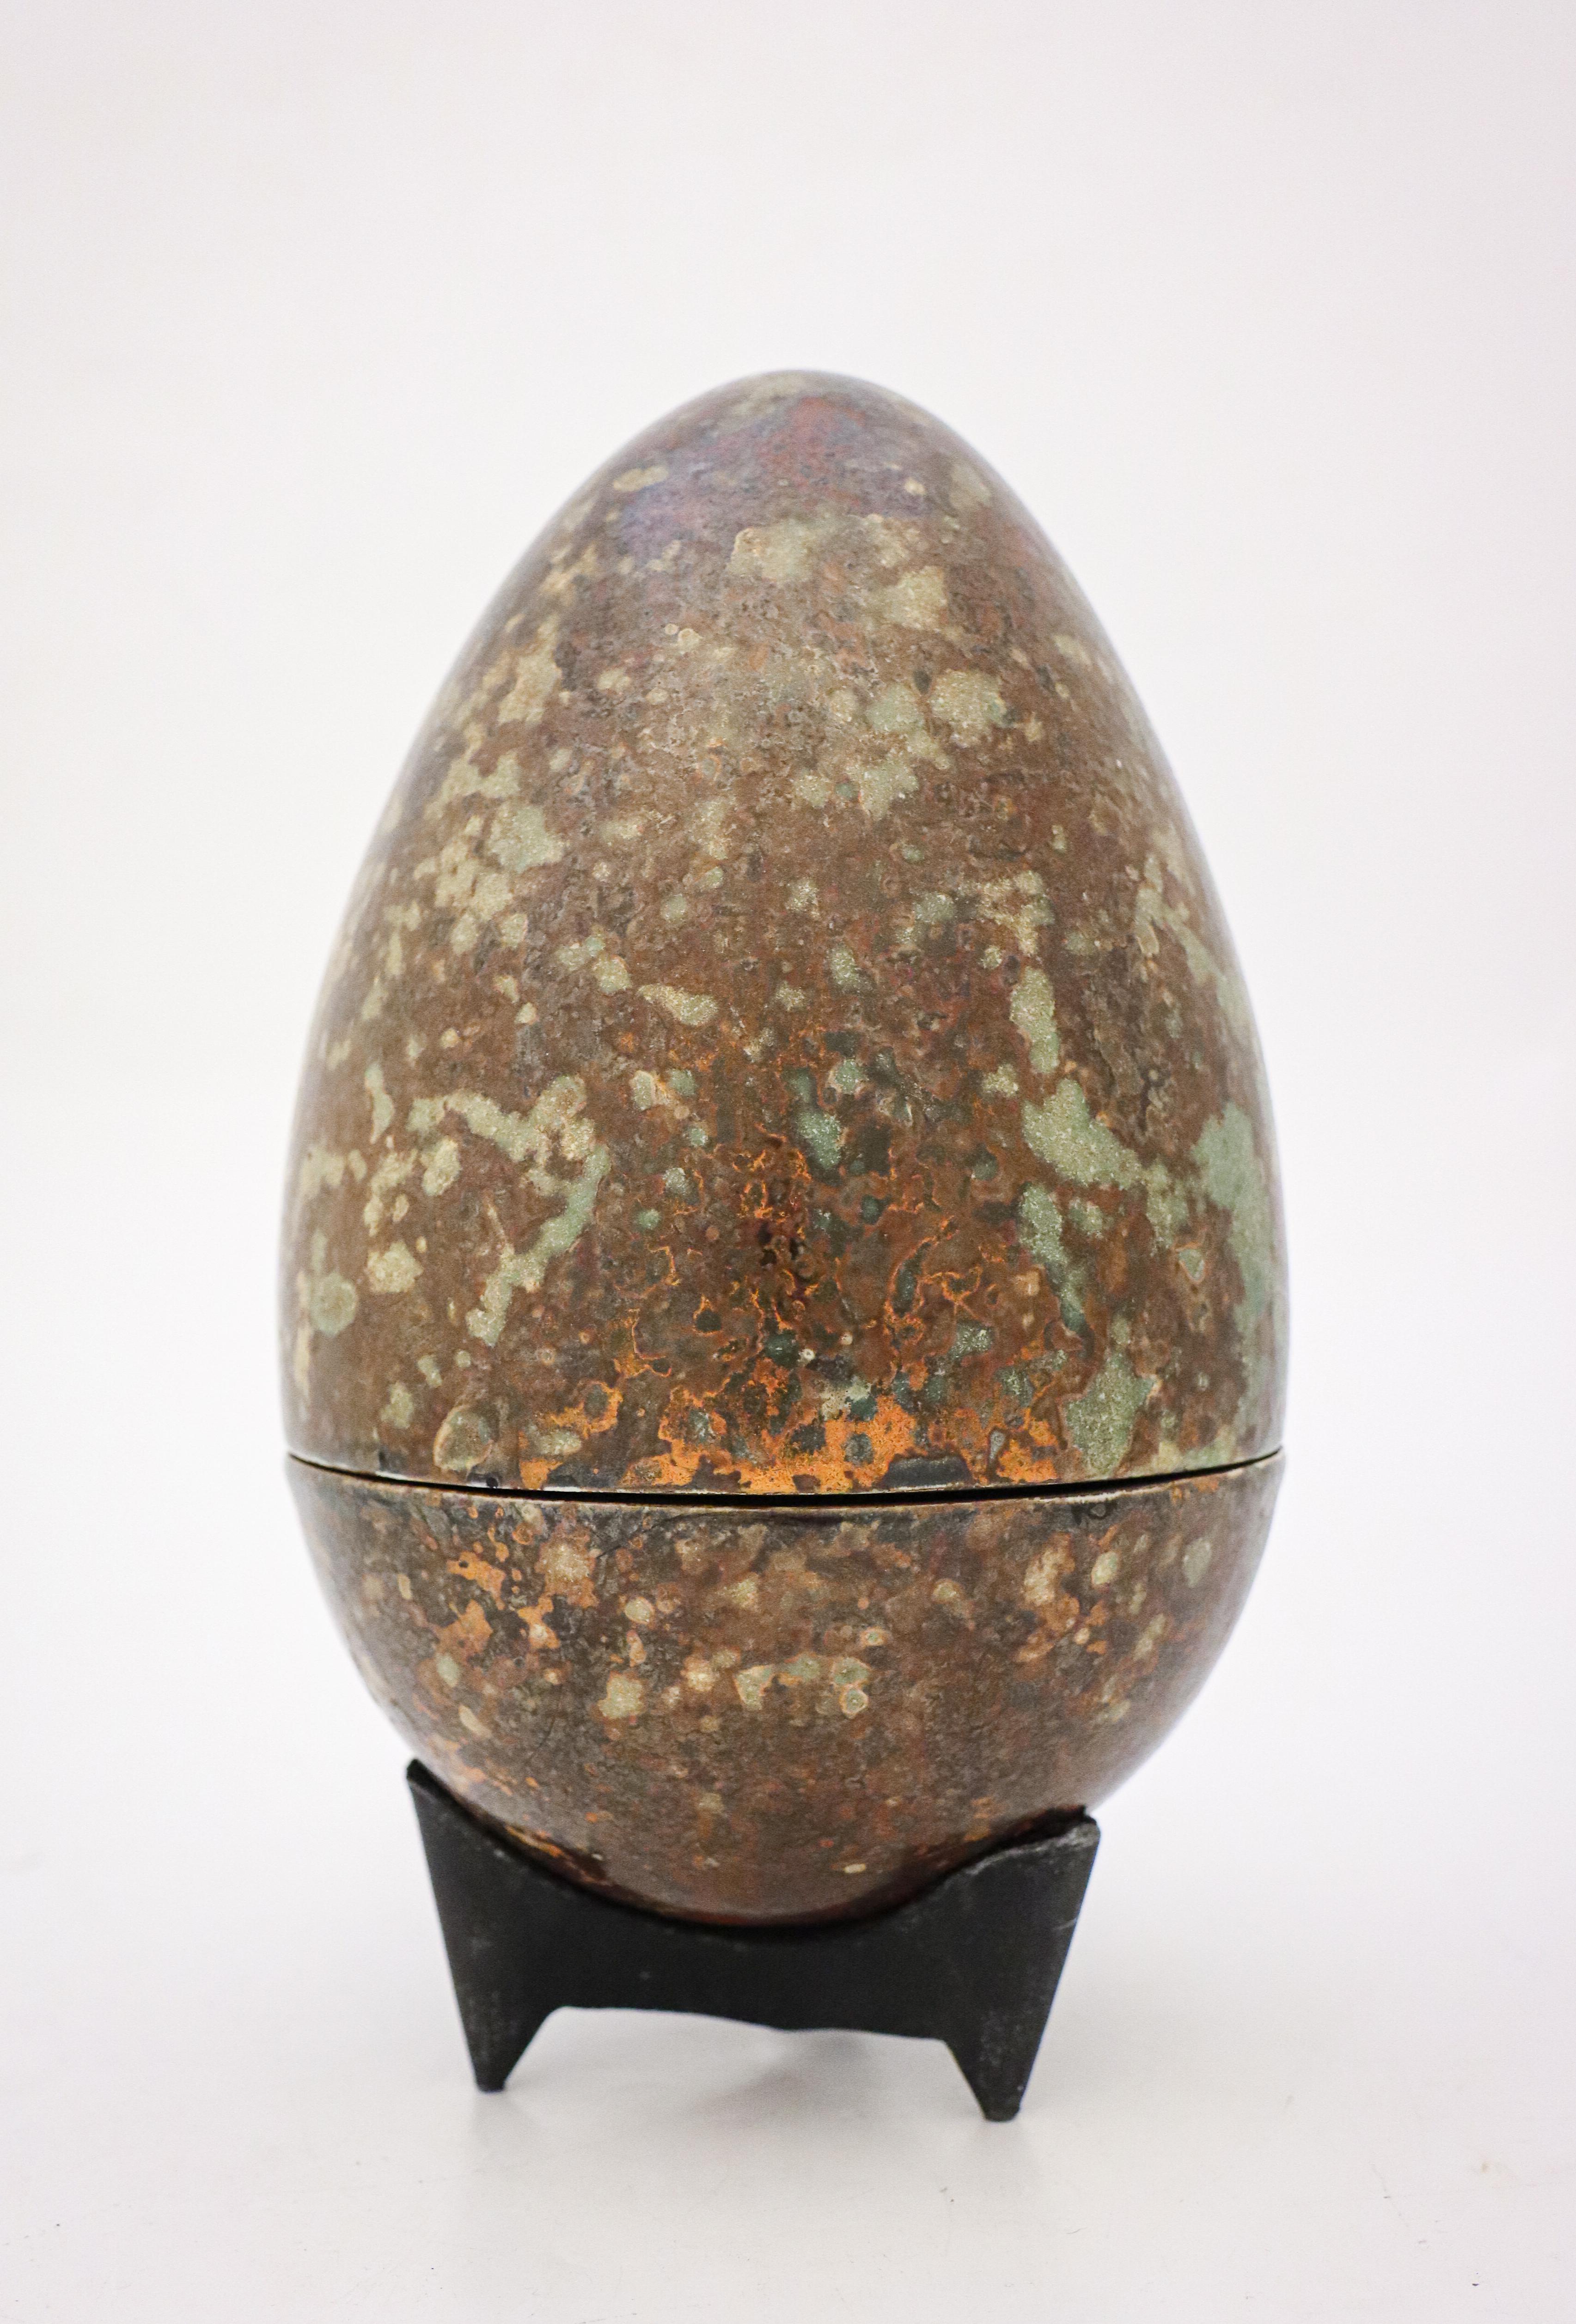 Egg designed by the Swedish ceramicist Hans Hedberg, who lived and worked in Biot, France. This egg is 24,5 cm (9.8